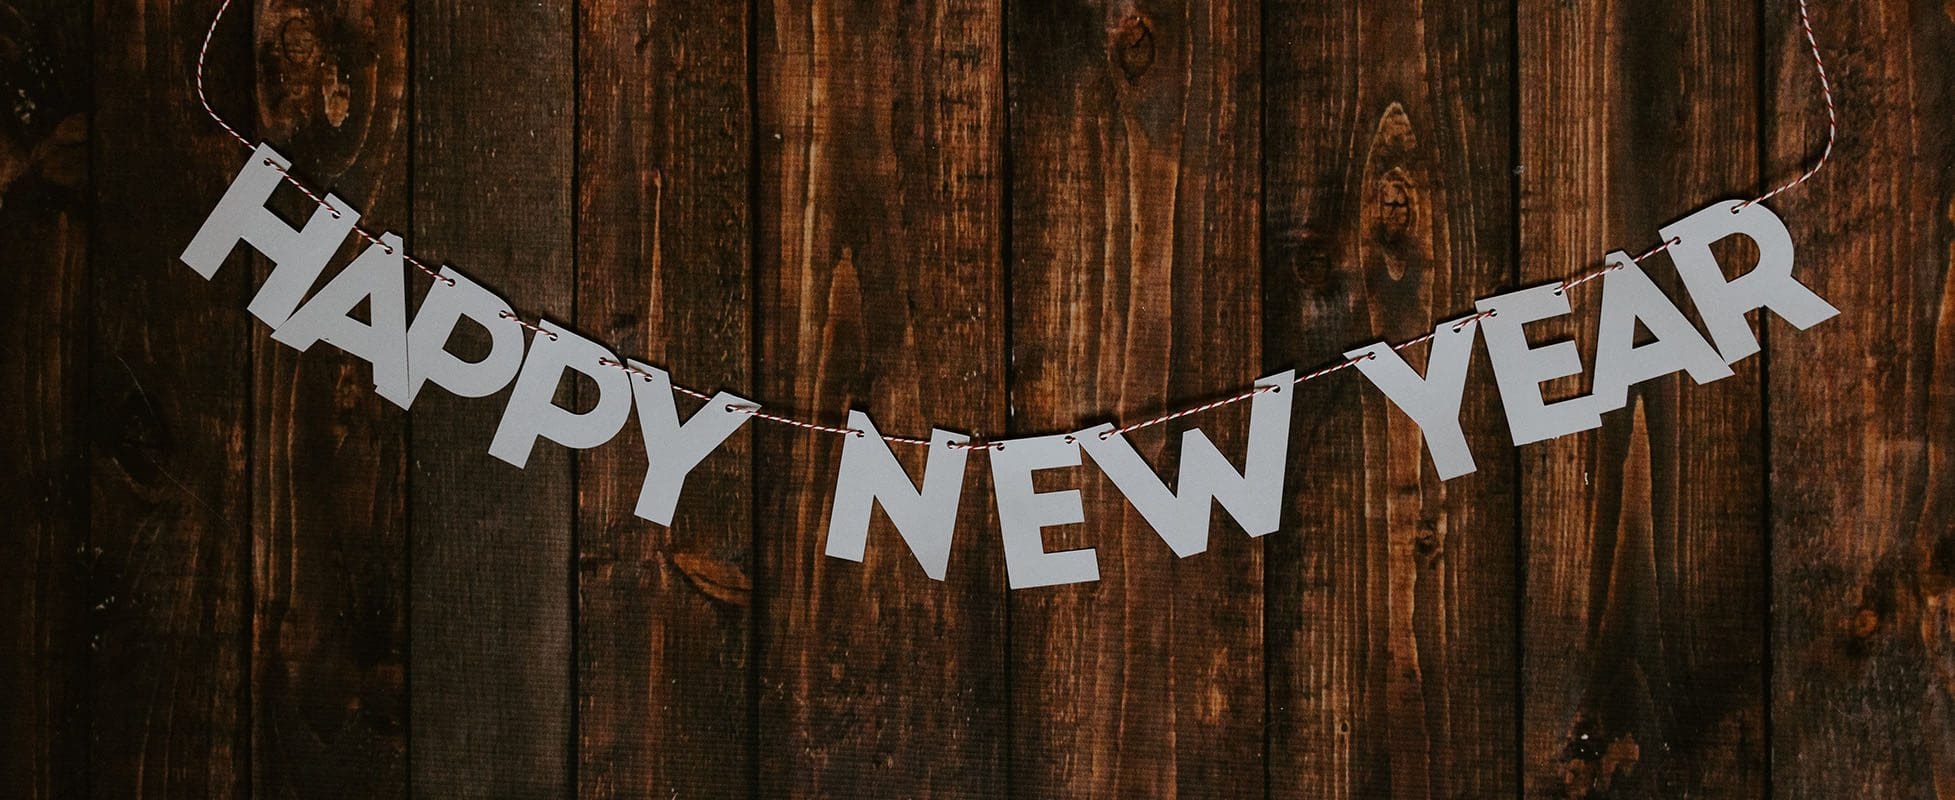 happy new year banner on wood background